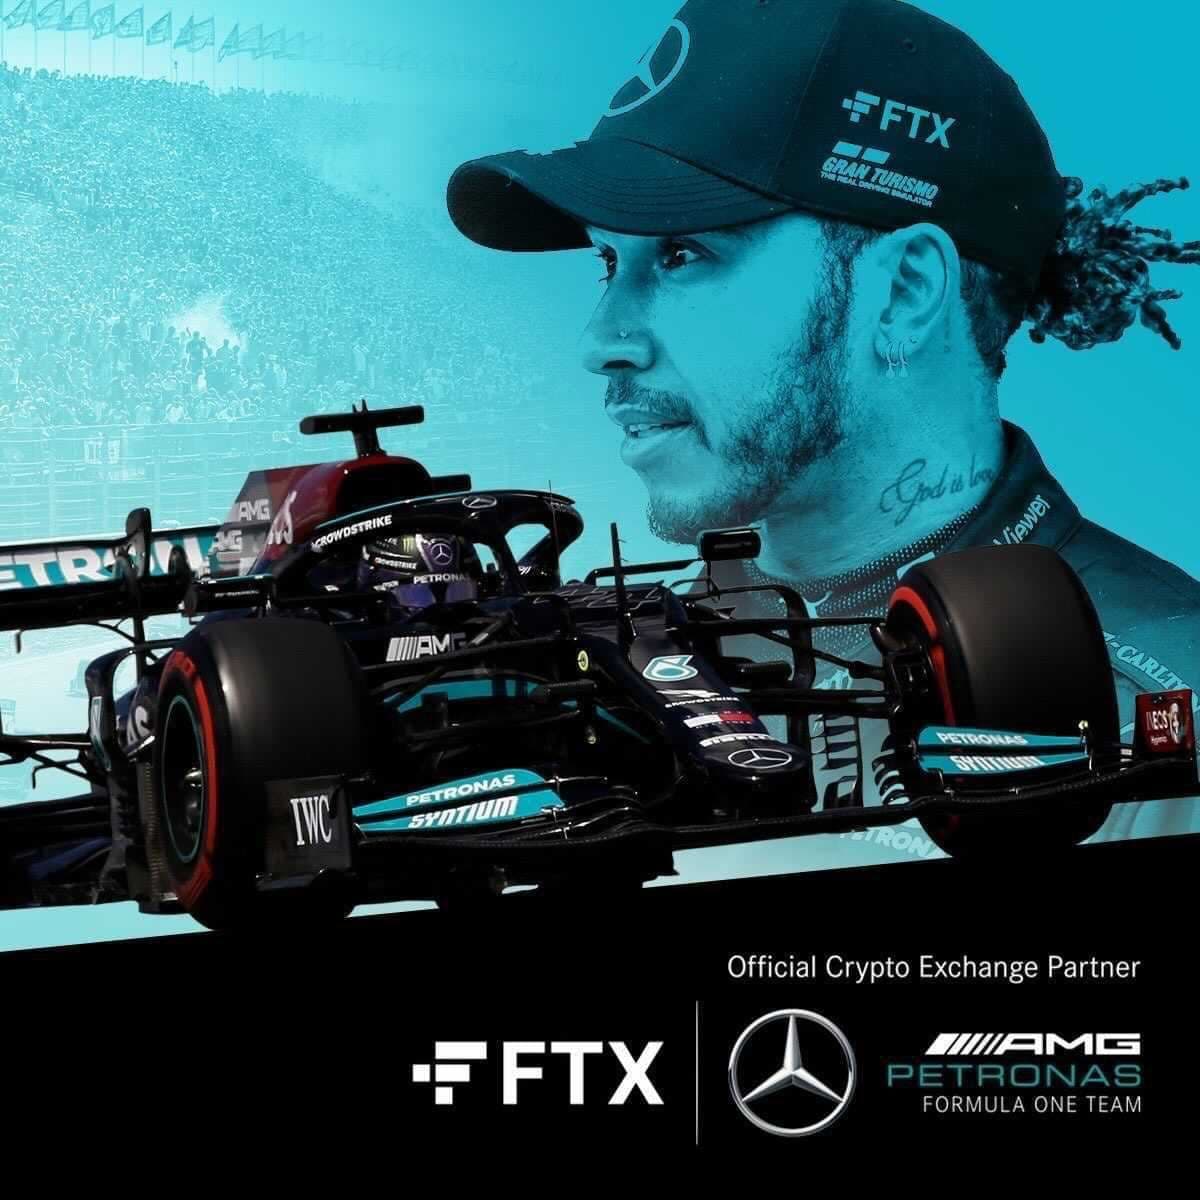 FTX Crypto Exchange\: Trader Tournament and Sponsorship with Mercedes\-AMG Petronas